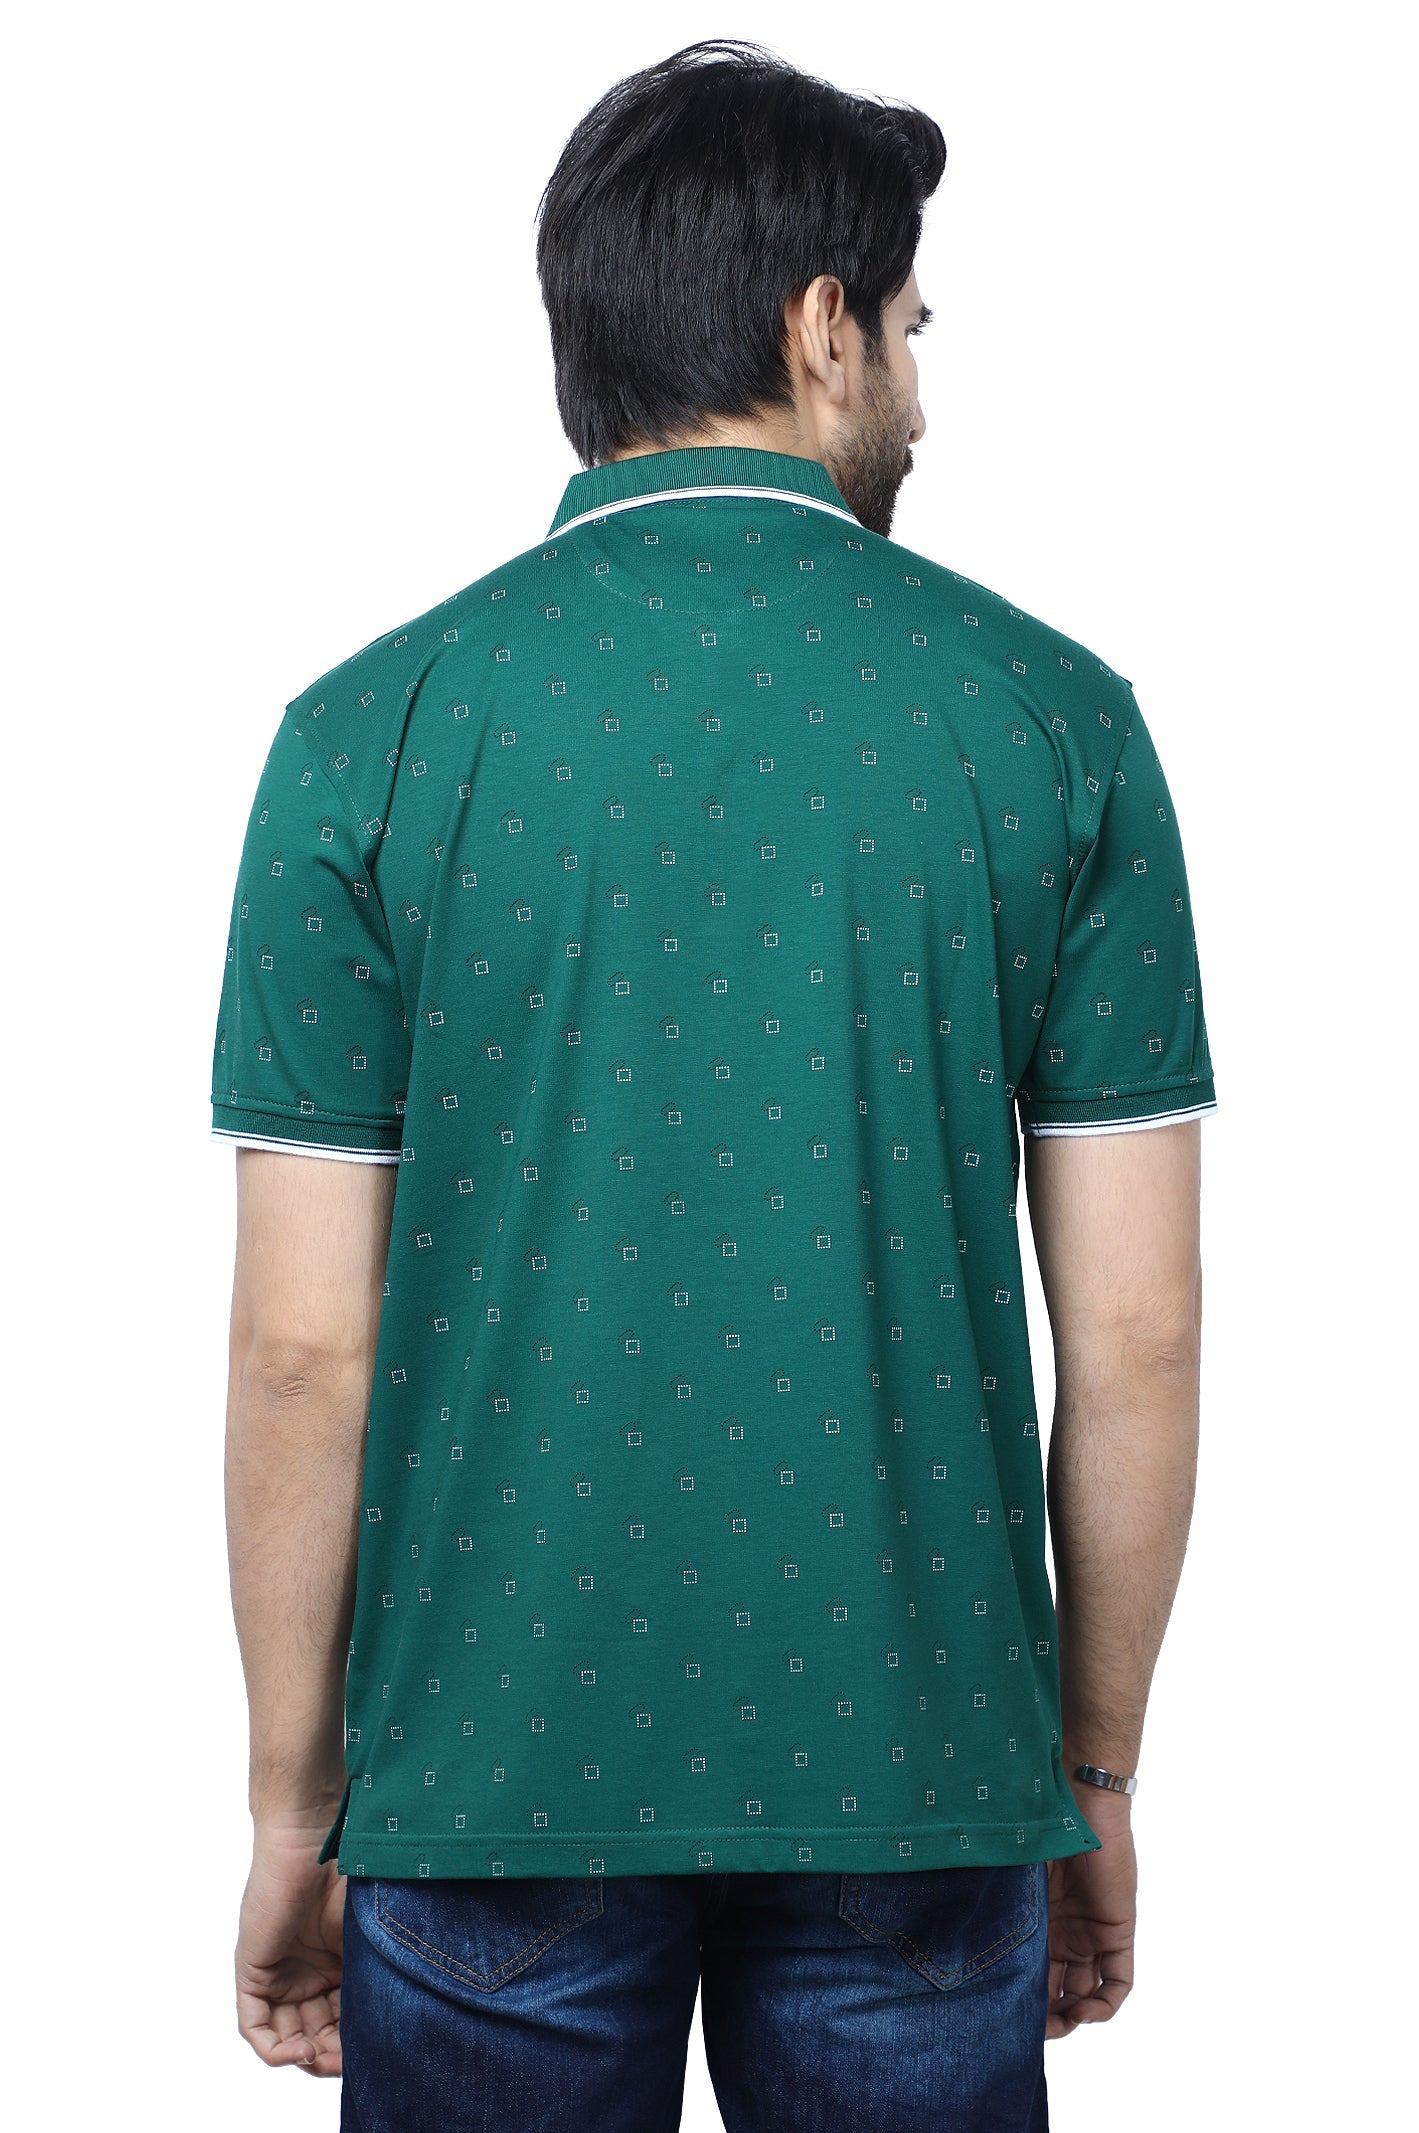 Diners Men's Polo T-Shirt SKU: NA885-GREEN - Diners